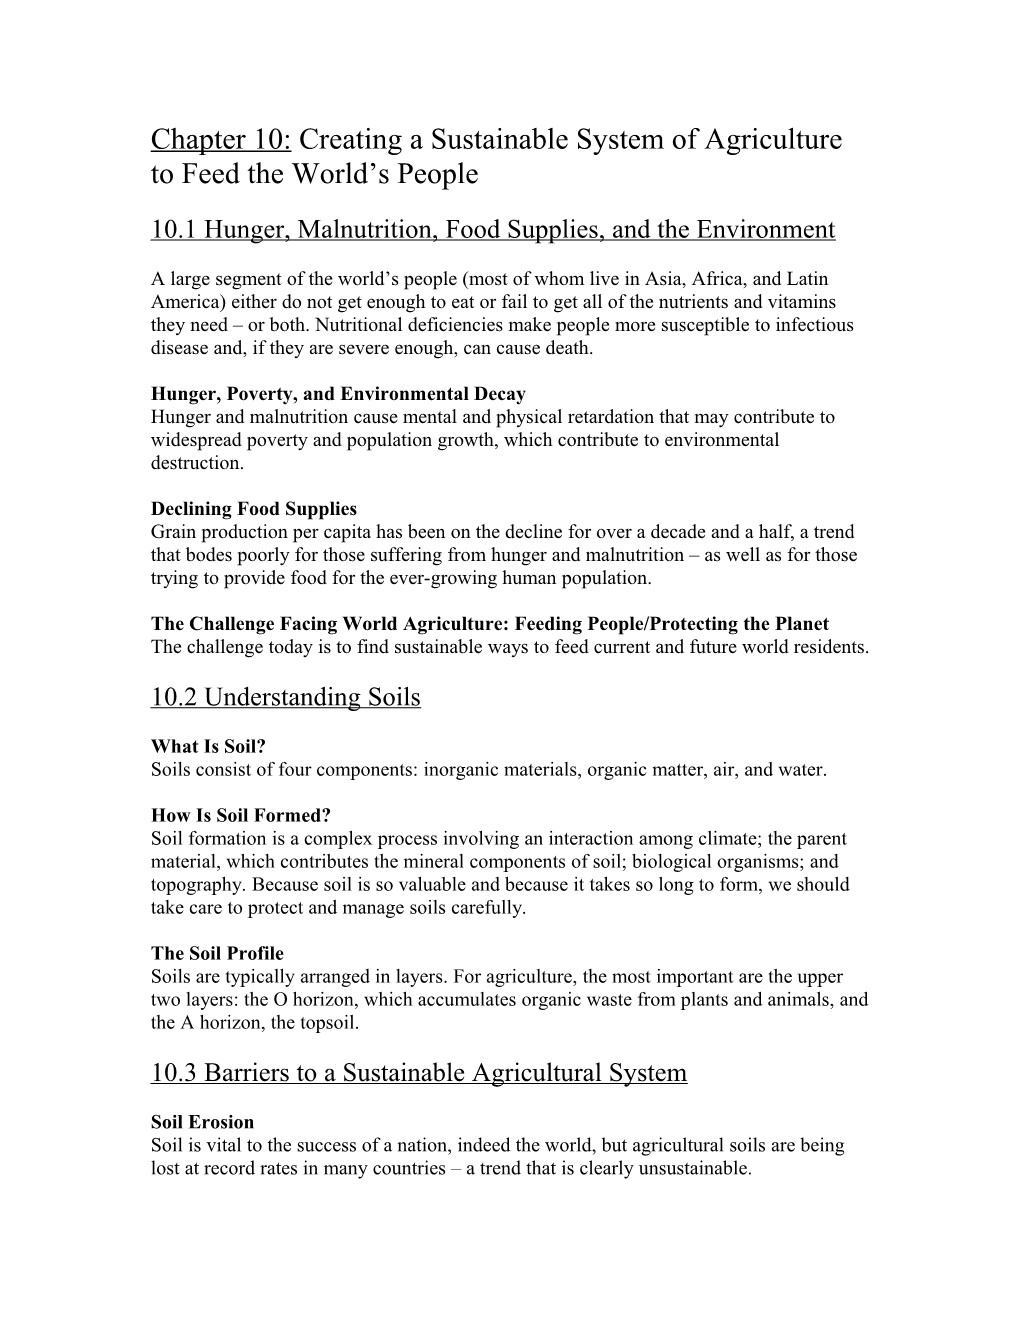 Chapter 10: Creating a Sustainable System of Agriculture to Feed the World S People